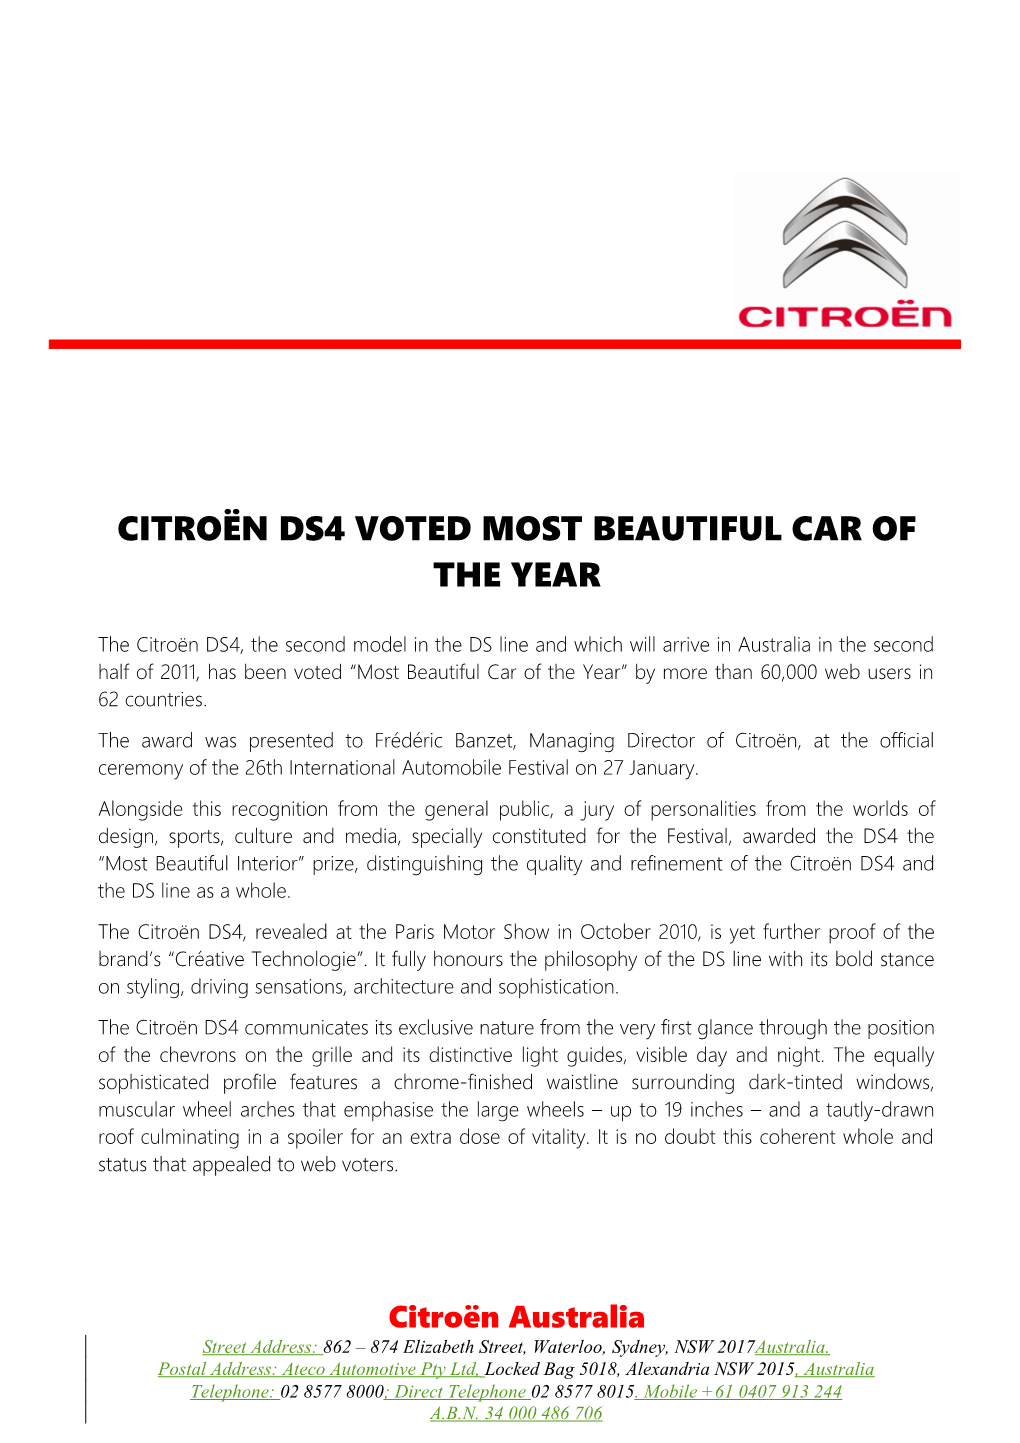 Citroën Ds4 Voted Most Beautiful Car of the Year